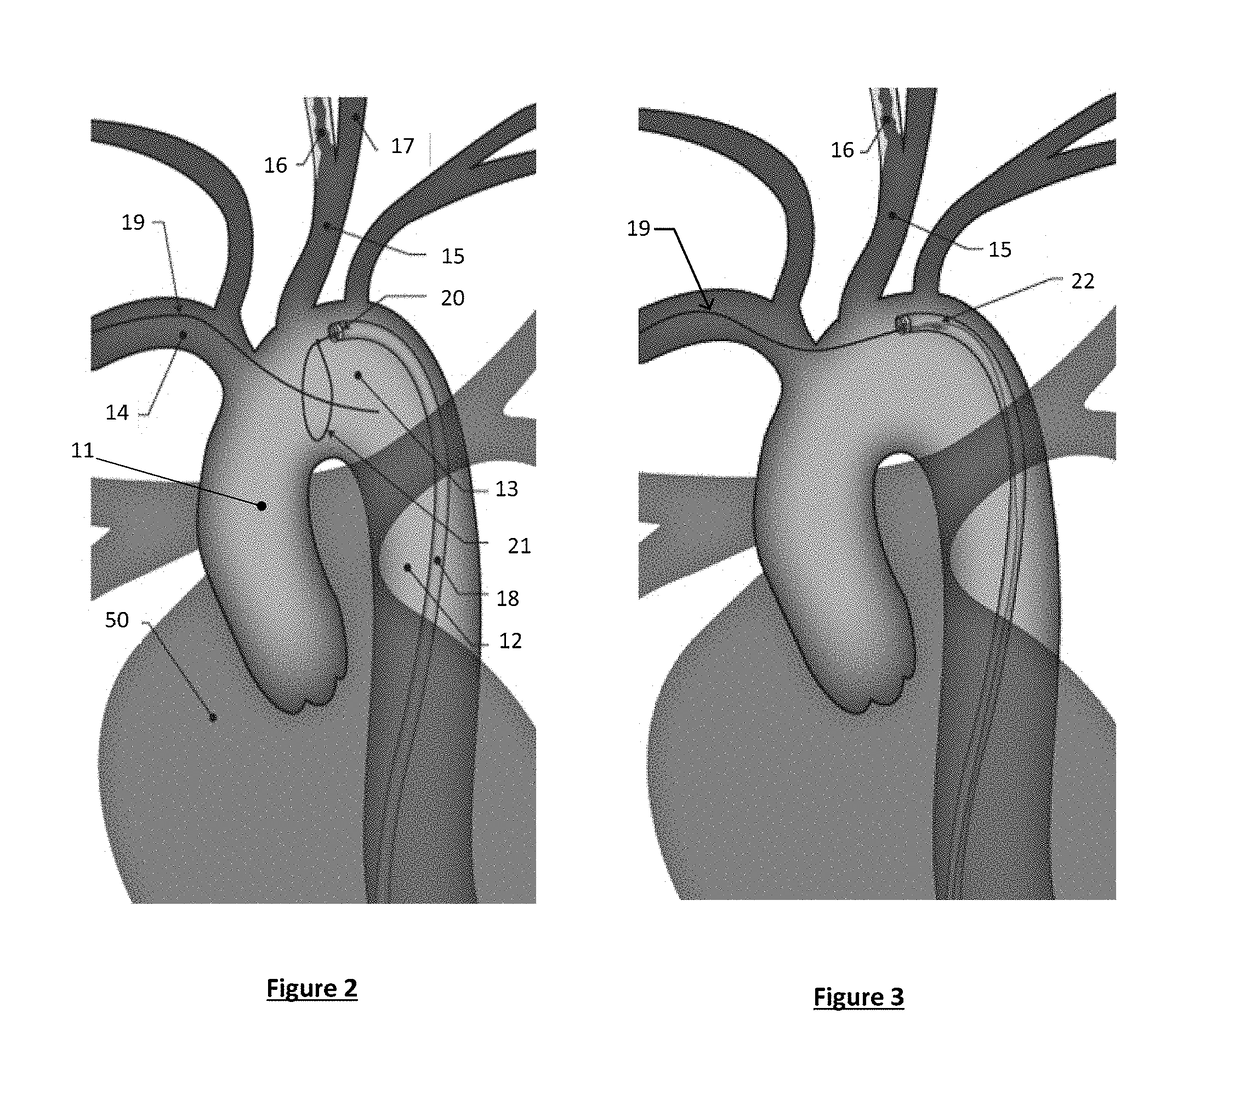 Bifurcated "y" anchor support for coronary interventions